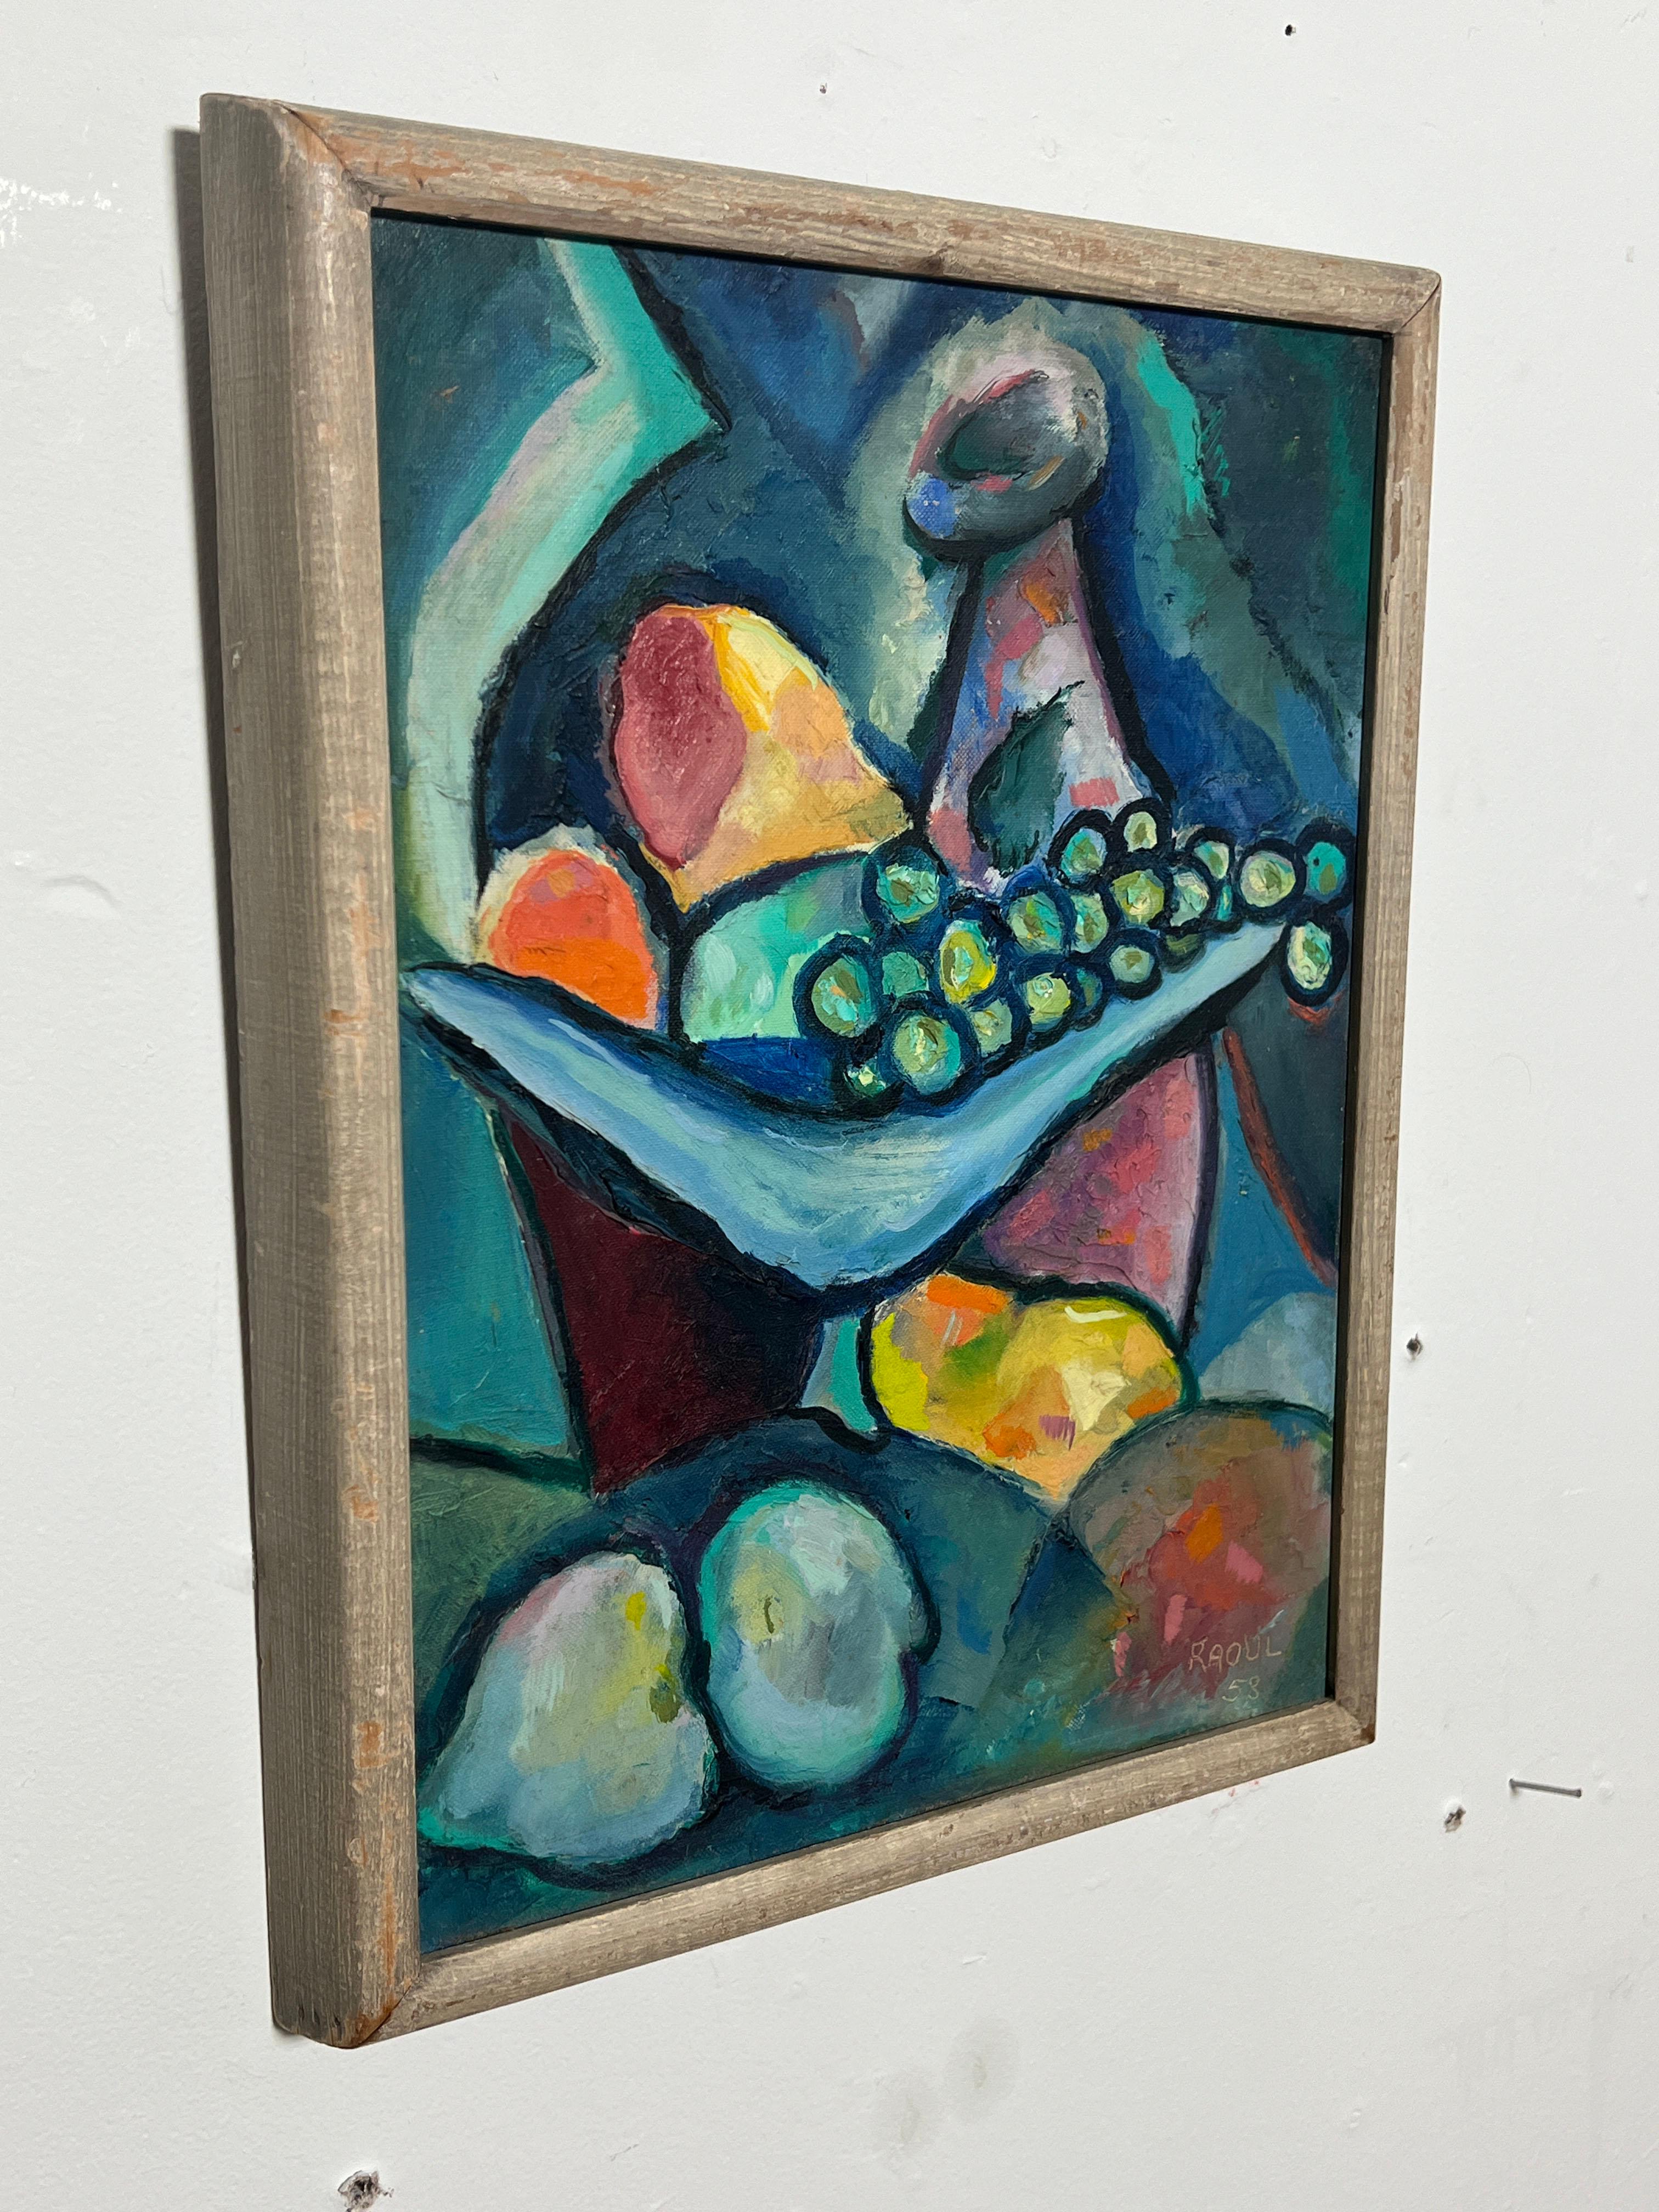 Mid-Century Modern Modernist Jewel Toned Still Life Oil Painting Signed Raoul, d. 1958